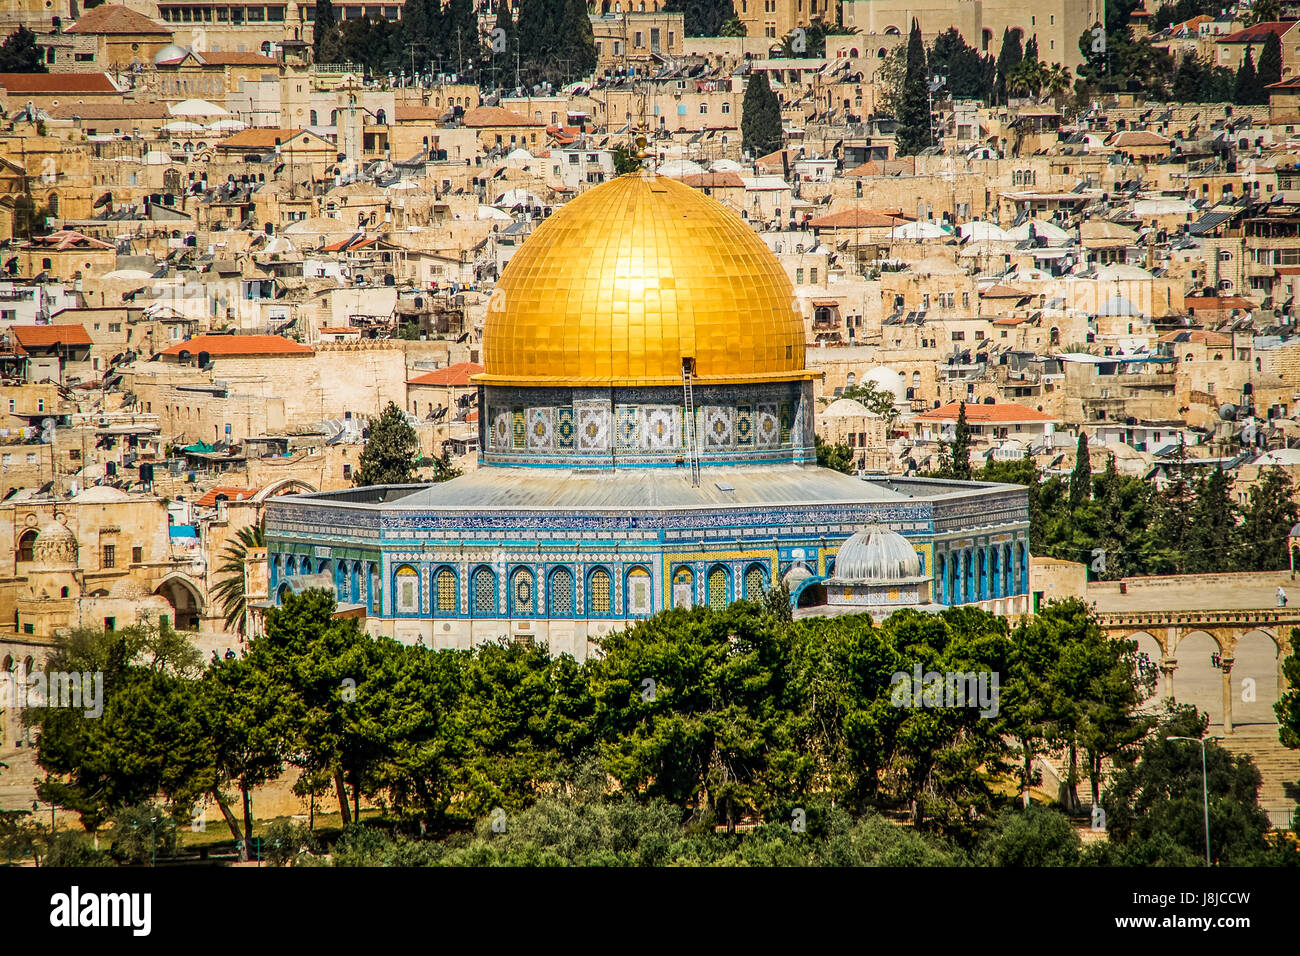 The Dome of the Rock or Al Aqsa mosque is an Islamic shrine located on the Temple Mount in the Old City of Jerusalem. Stock Photo